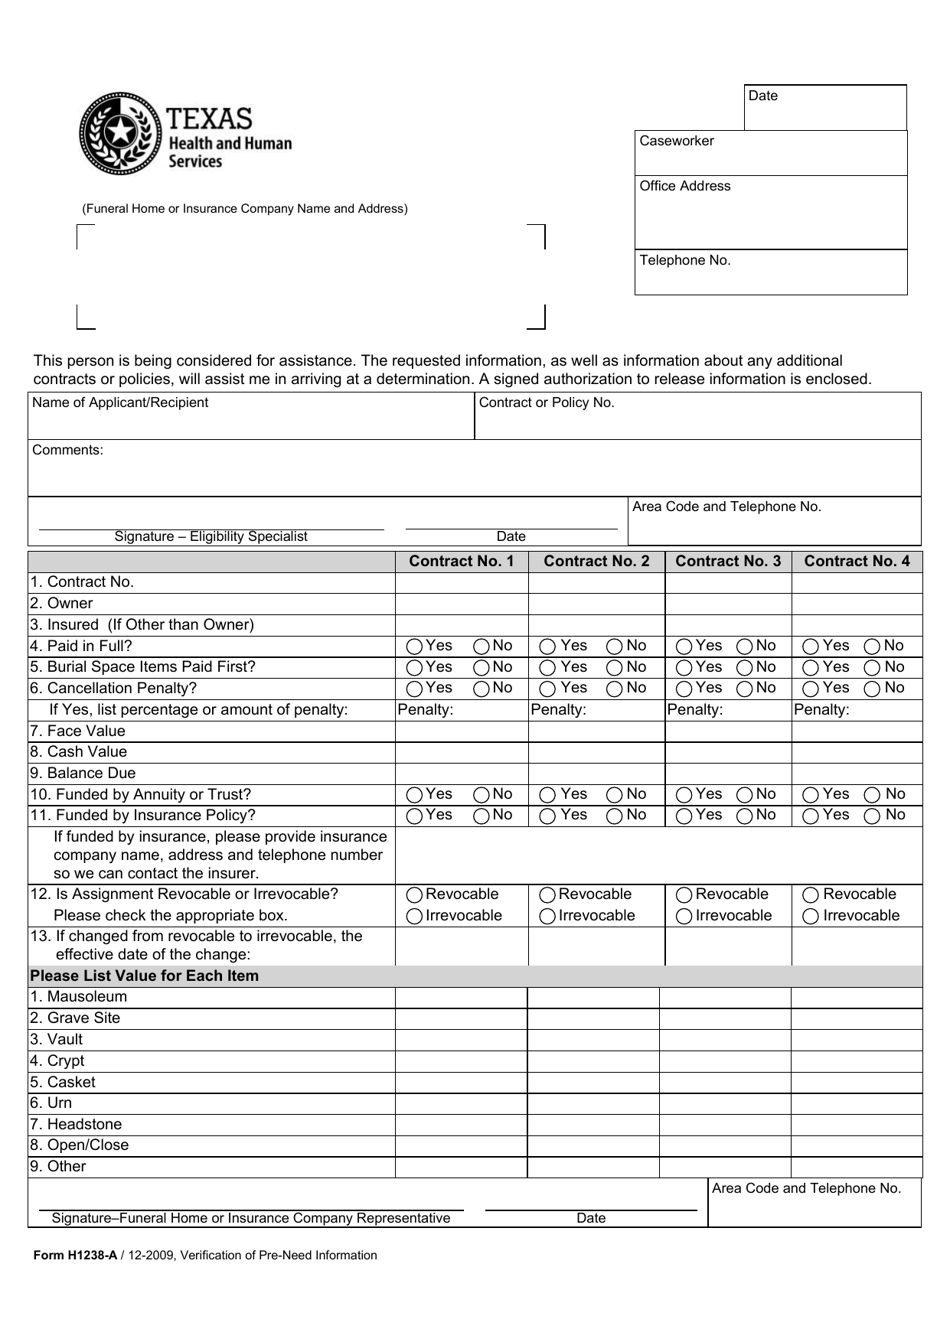 Form H1238-A Verification of Pre-need Information - Texas, Page 1